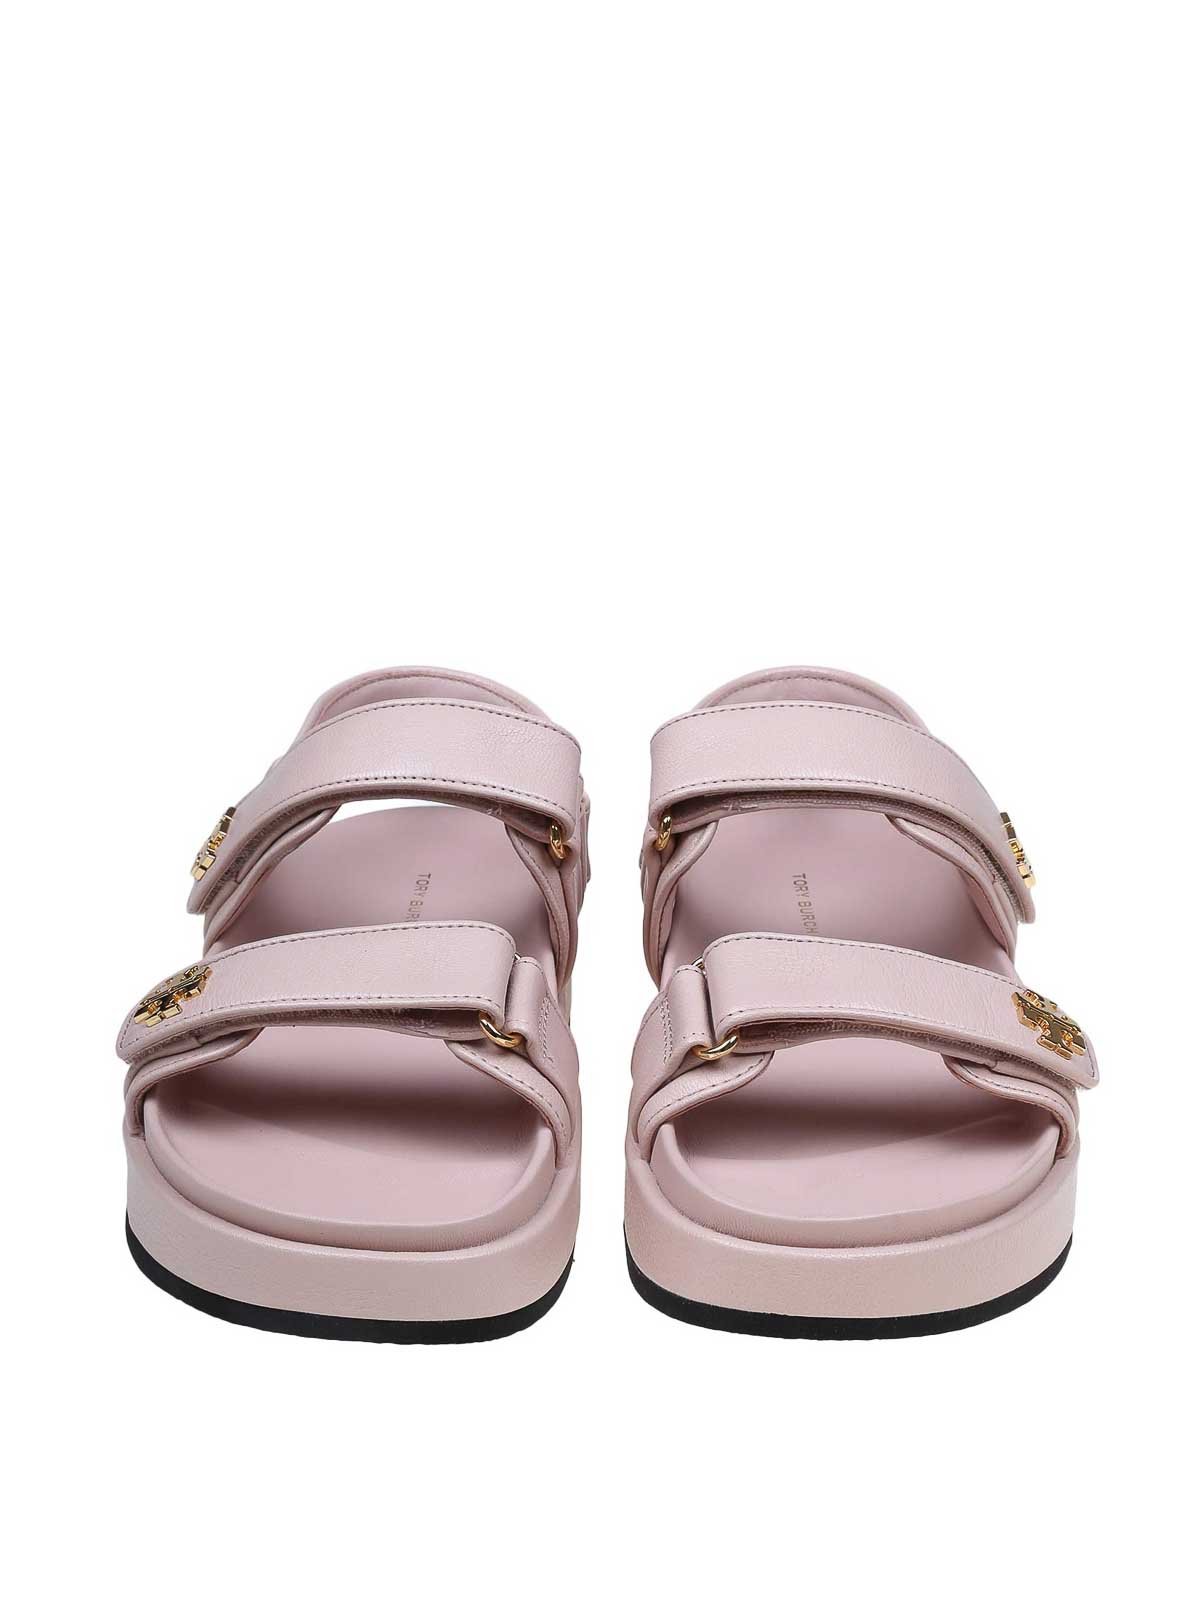 Shop Tory Burch Leather Kira Sandals In Pink